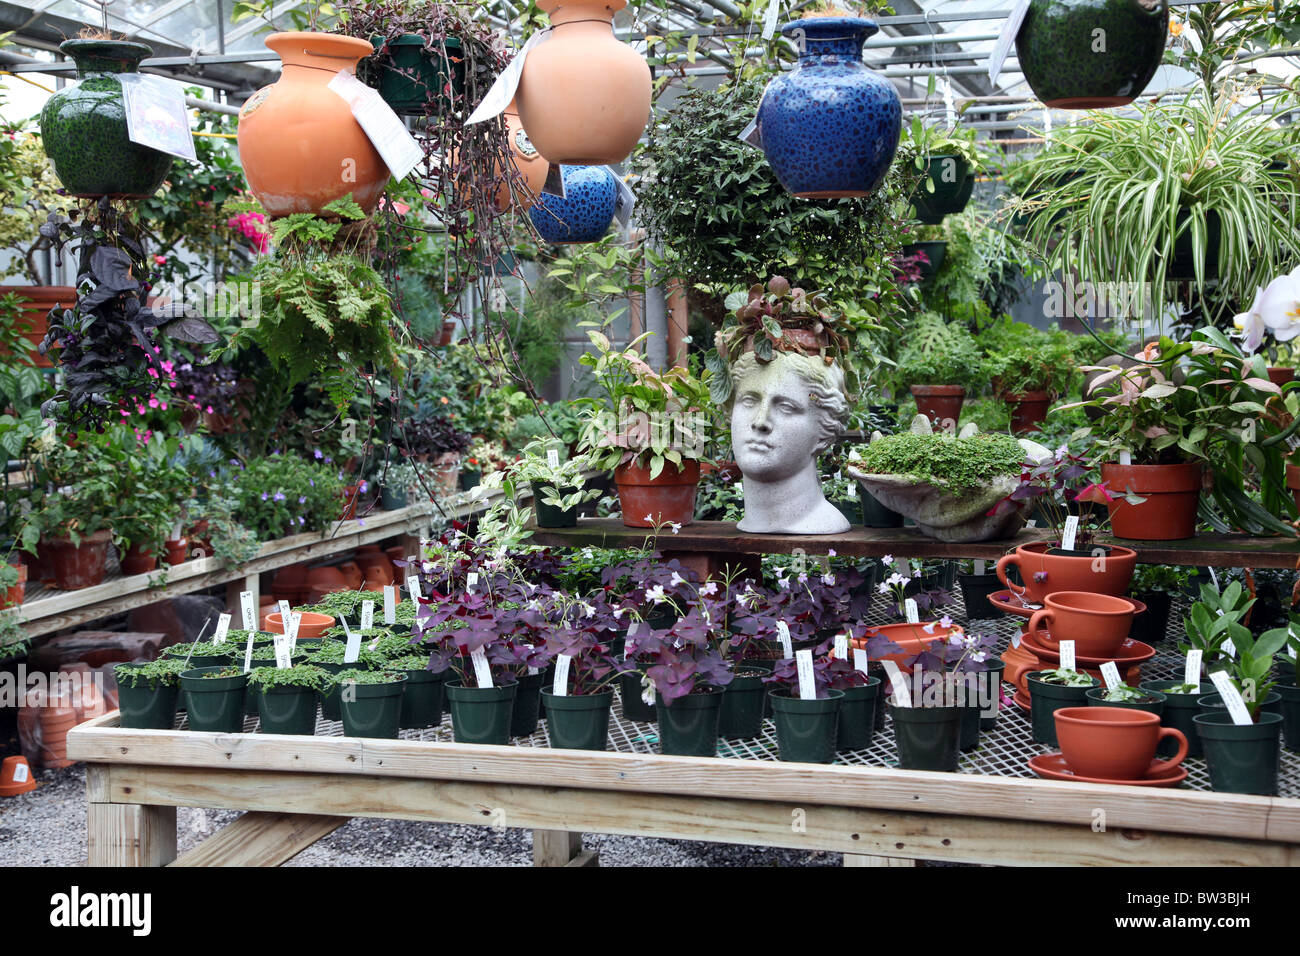 Variety of plants and pots inside a commercial greenhouse Stock Photo